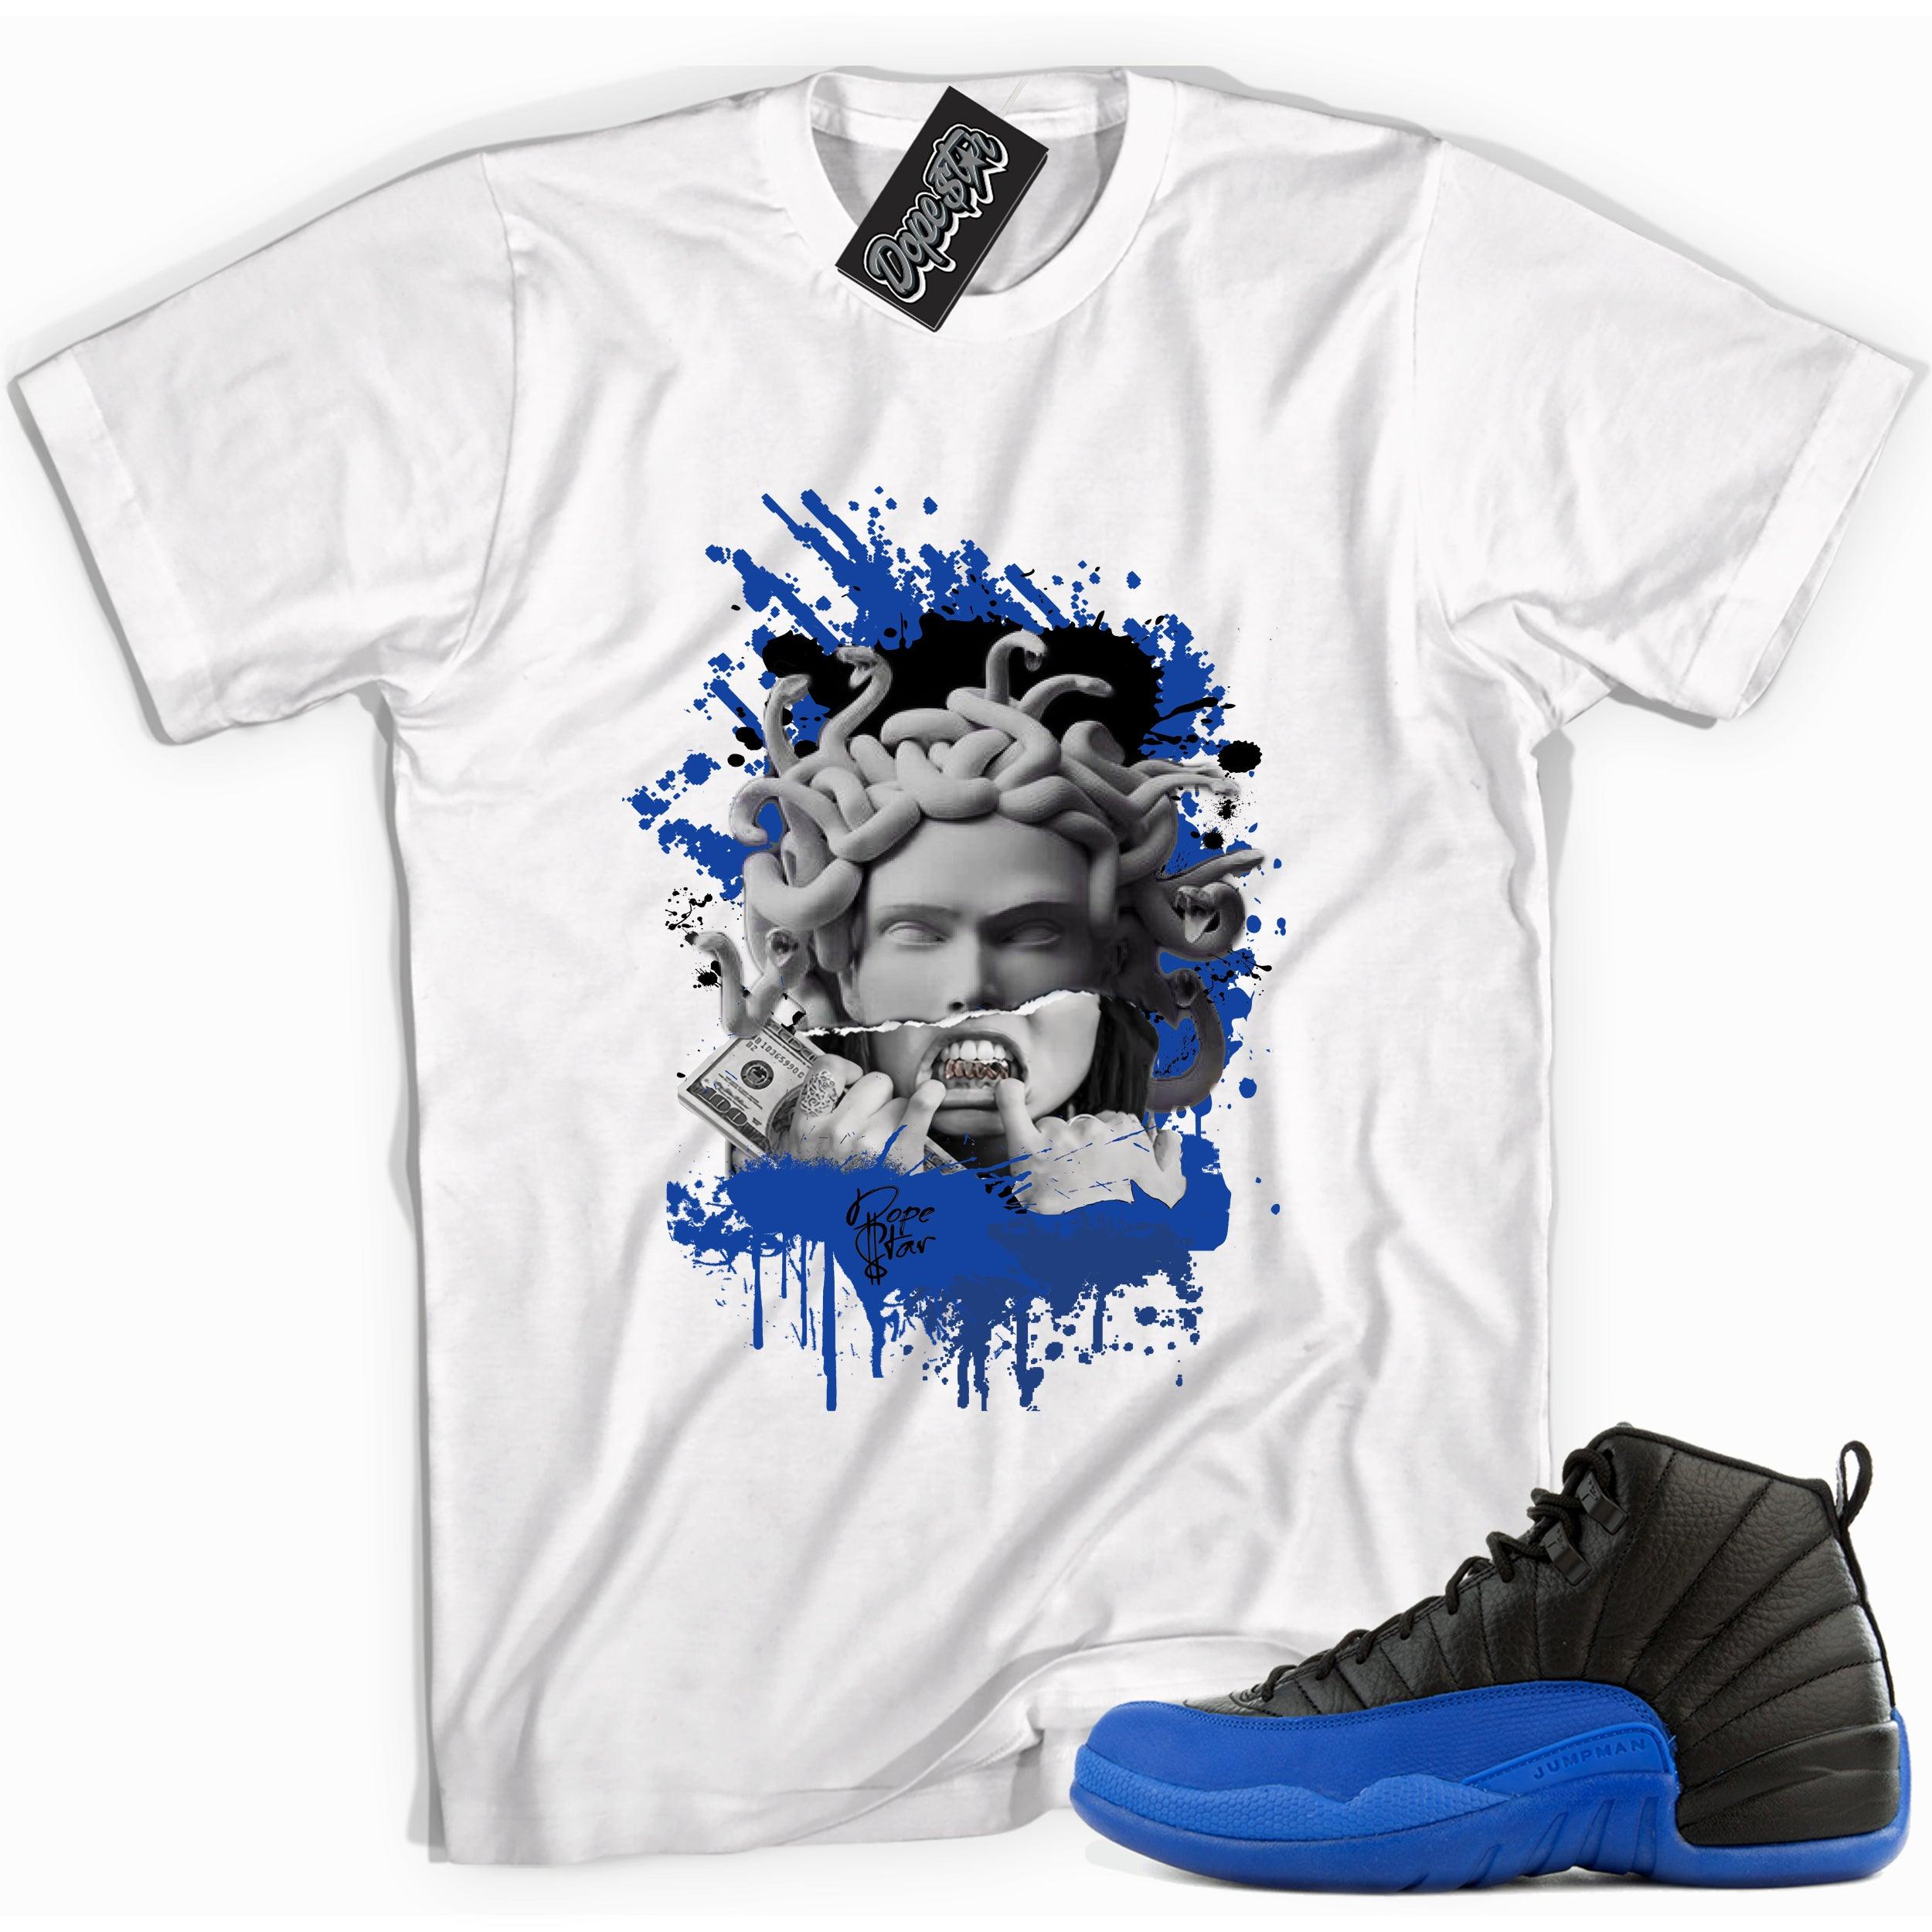 Cool white graphic tee with 'medusa' print, that perfectly matches Air Jordan 12 Retro Black Game Royal sneakers.